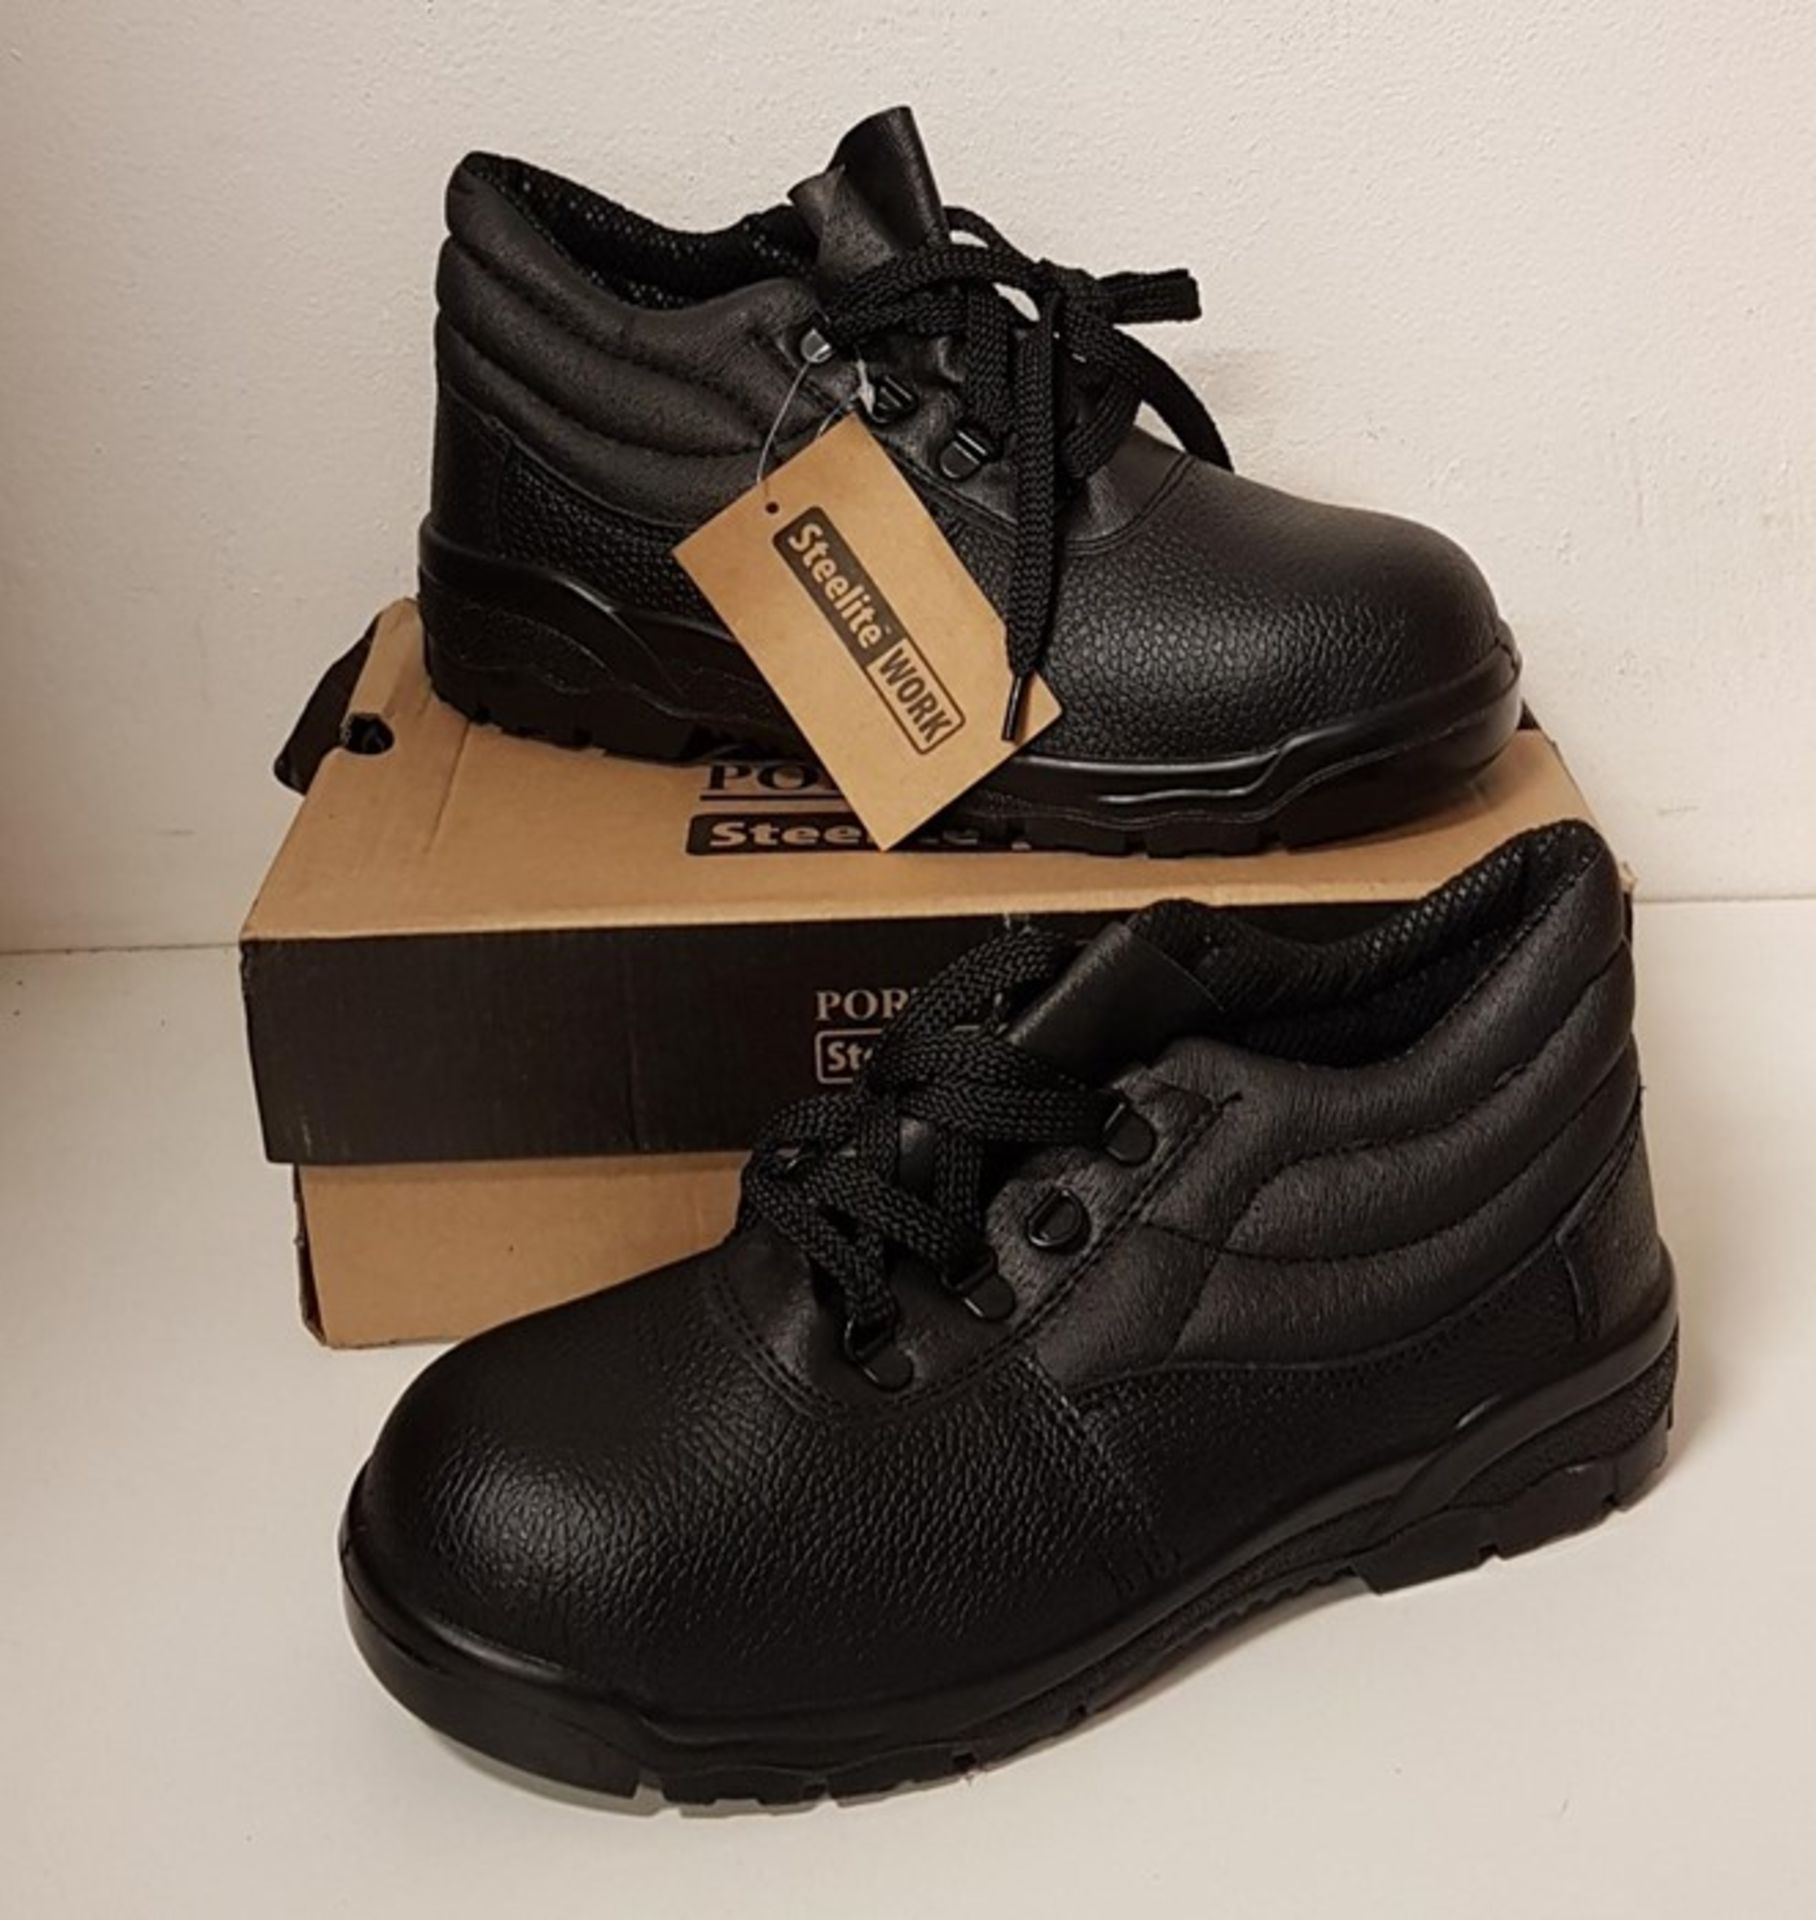 1 BOXED PAIR OF PORTWEST STEELITE WORK SAFETY BOOTS IN BLACK, SIZE 12 (VIEWING HIGHLY RECOMMENDED)